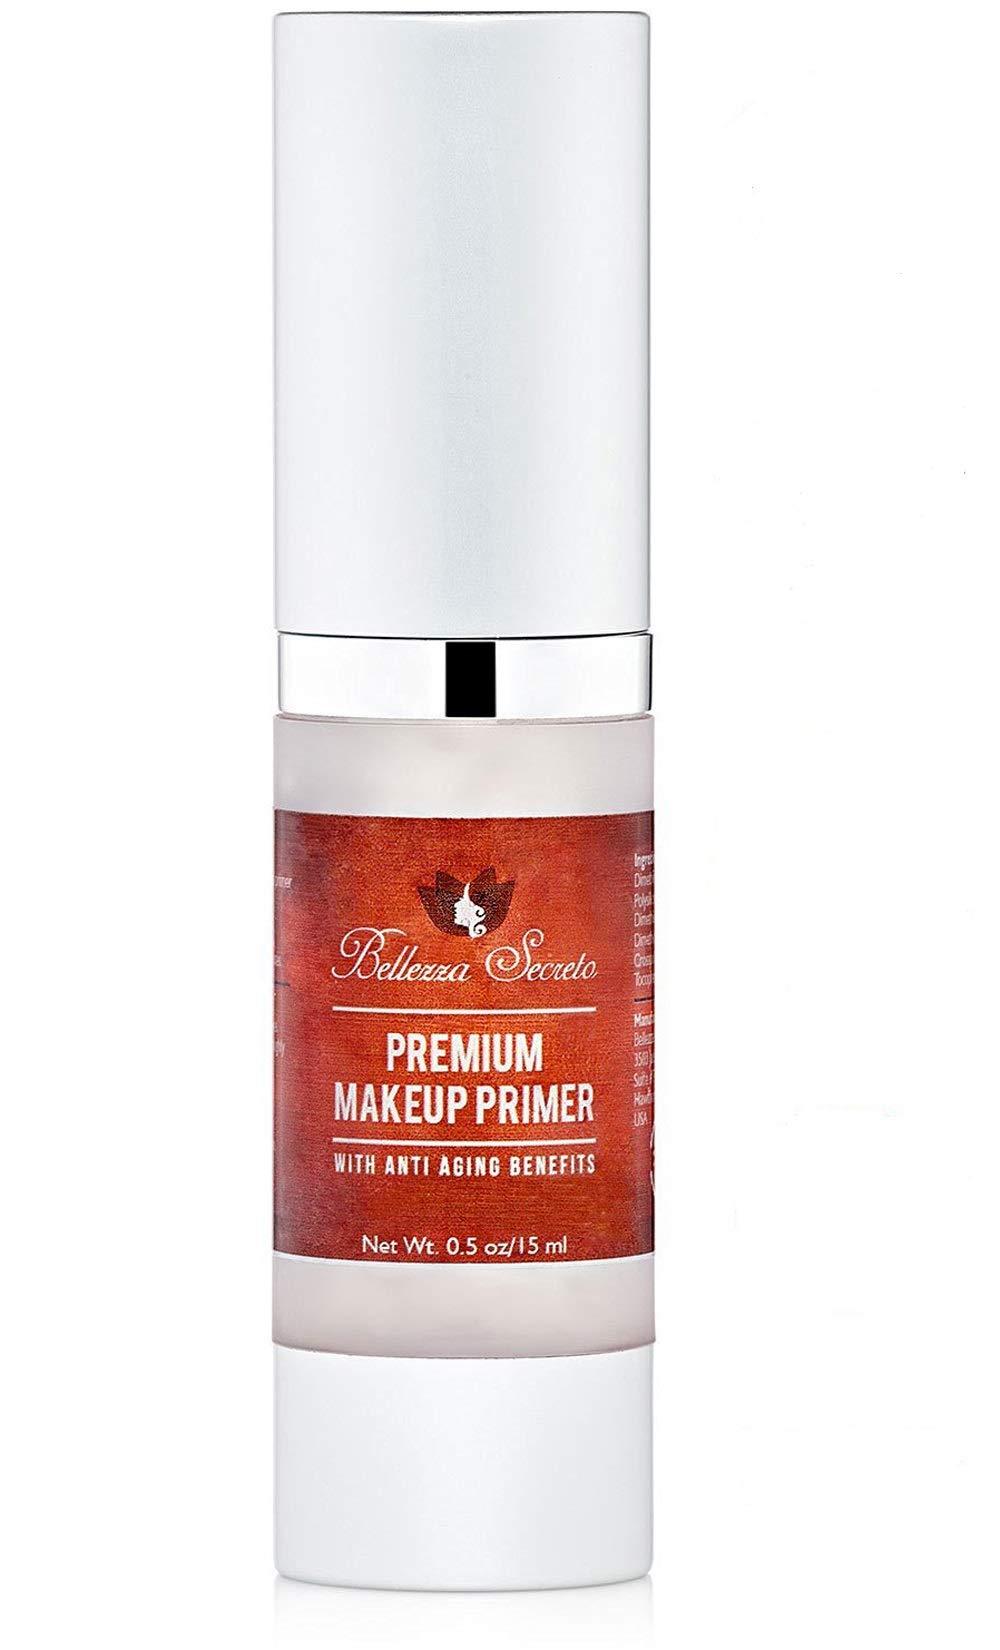 Premium Foundation Makeup Primer- anti aging, fine lines, wrinkles & pore minimizer primer - Enriched with Vitamin A, C & E for flawless skin- Waterproof makeup base - Made in The USA FDA Certified - image 2 of 9